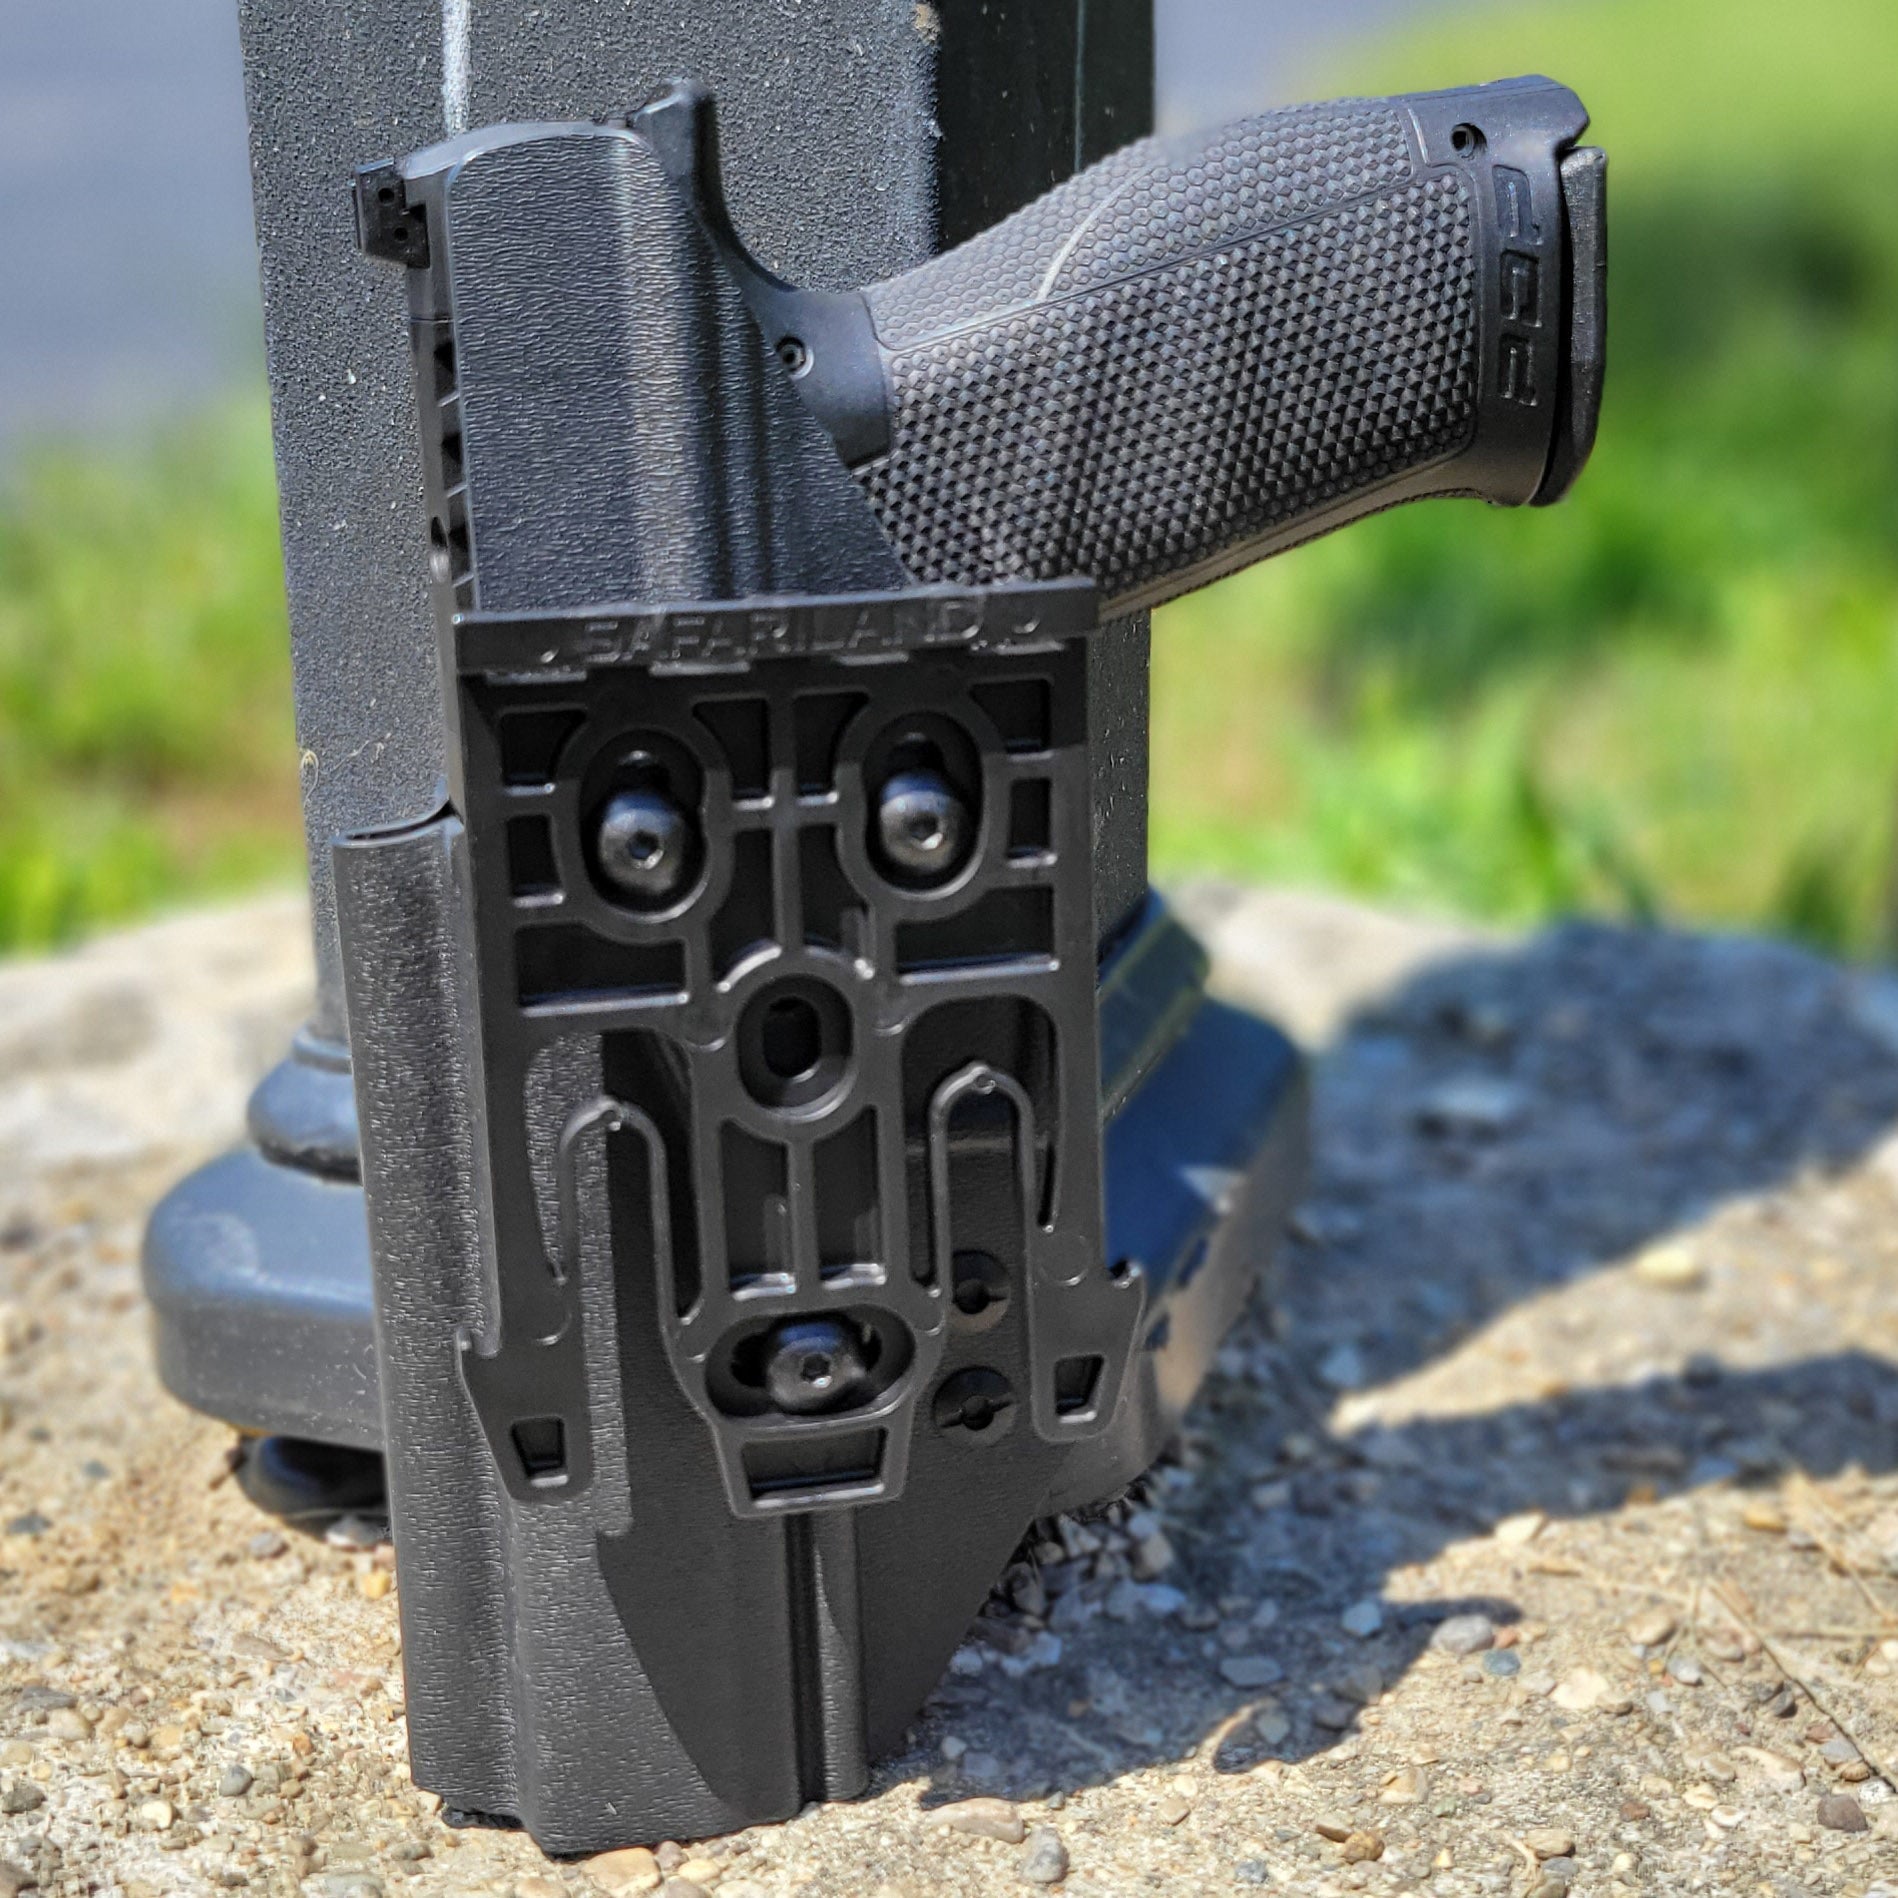 For the best, Outside Waistband OWB Kydex Holster designed to fit the Walther PDP Pro SD 4.6" handgun, shop Four Brothers Holsters.  Full sweat guard, adjustable retention. Made in USA from .080" black thermoplastic for durability. Open muzzle for threaded barrels, cleared for red dot sights. Walther, Pro SD